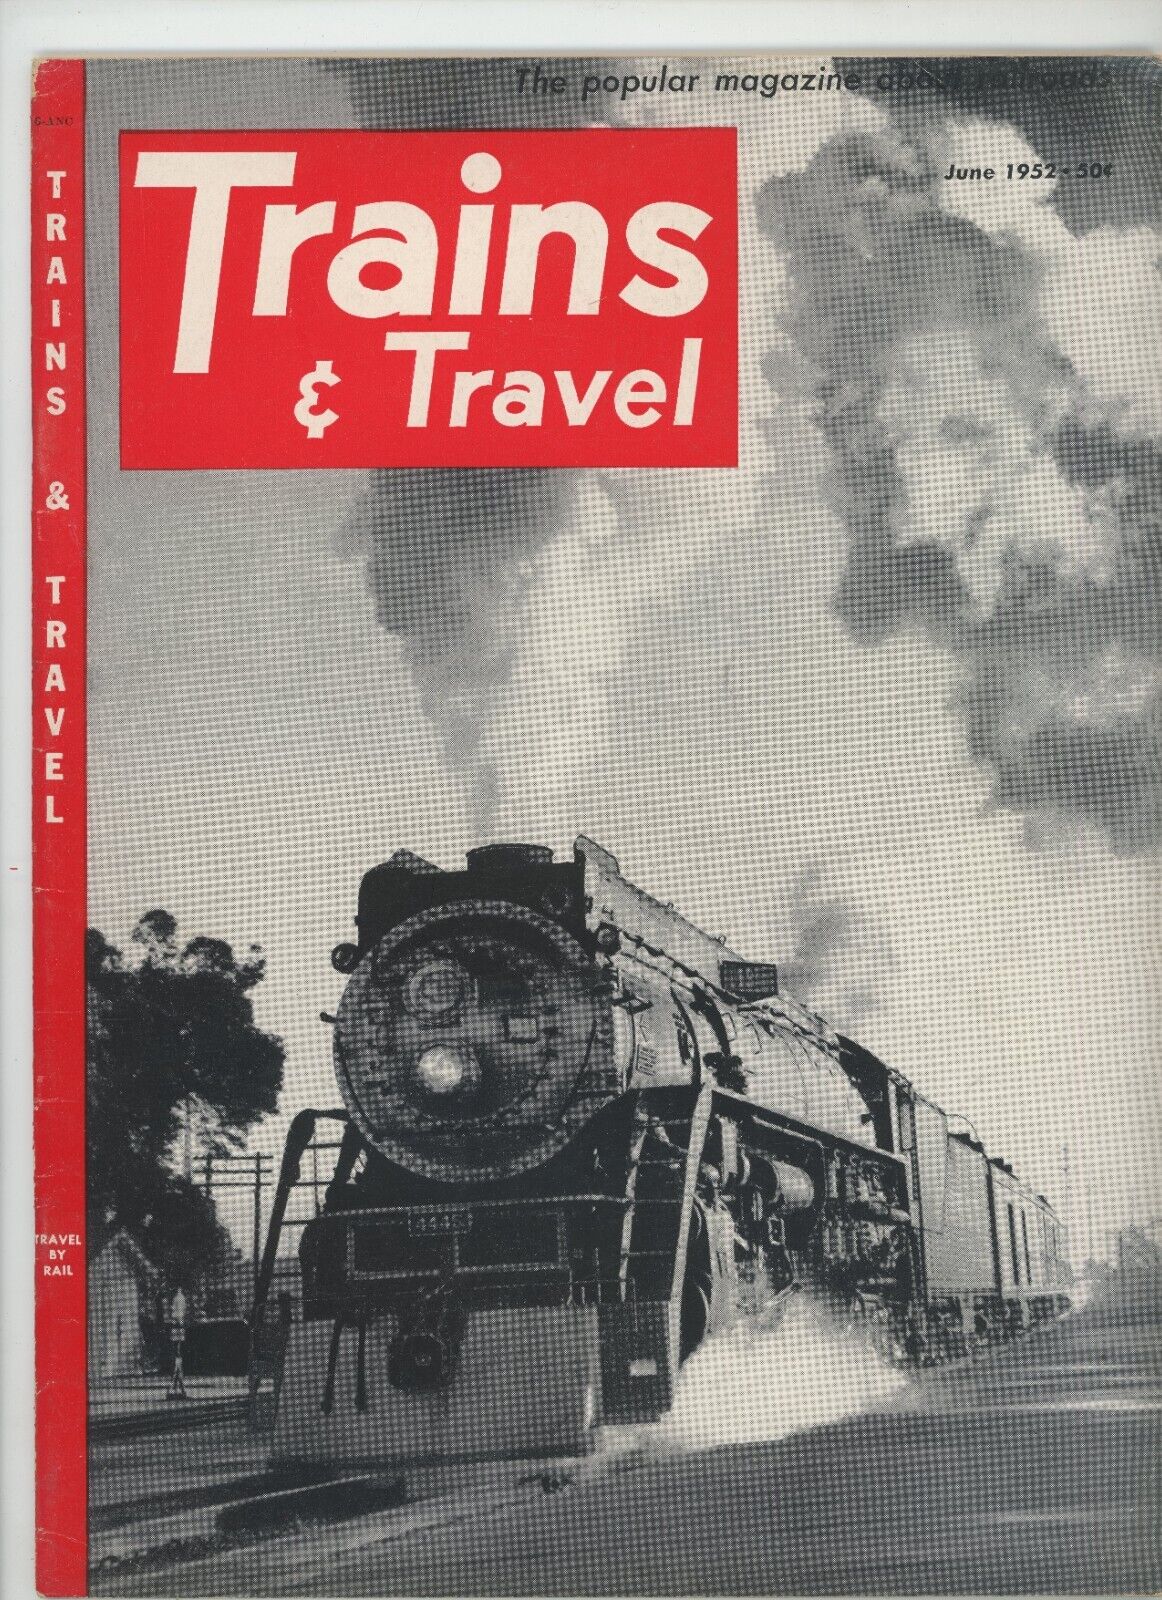 Trains Magazine  June 1952 in Very Good Condition